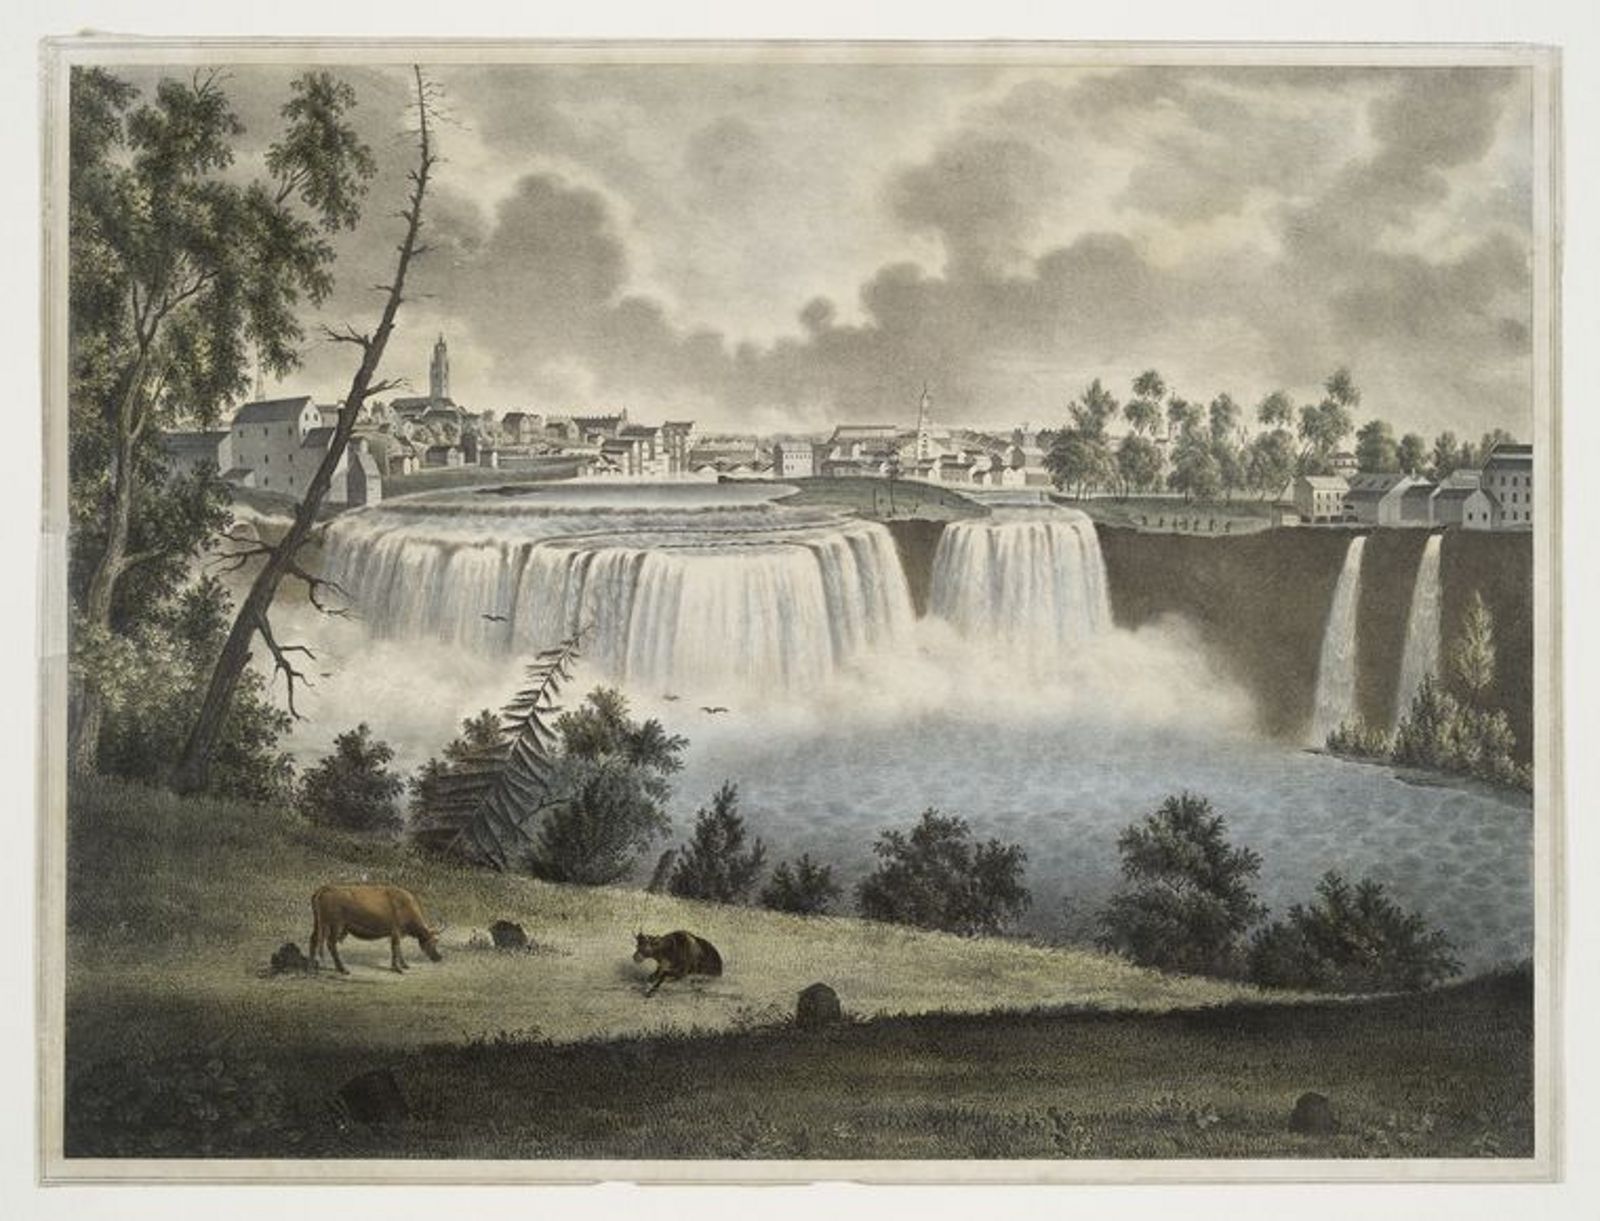 The Upper Falls of the Genesee at Rochester, mid-1800s